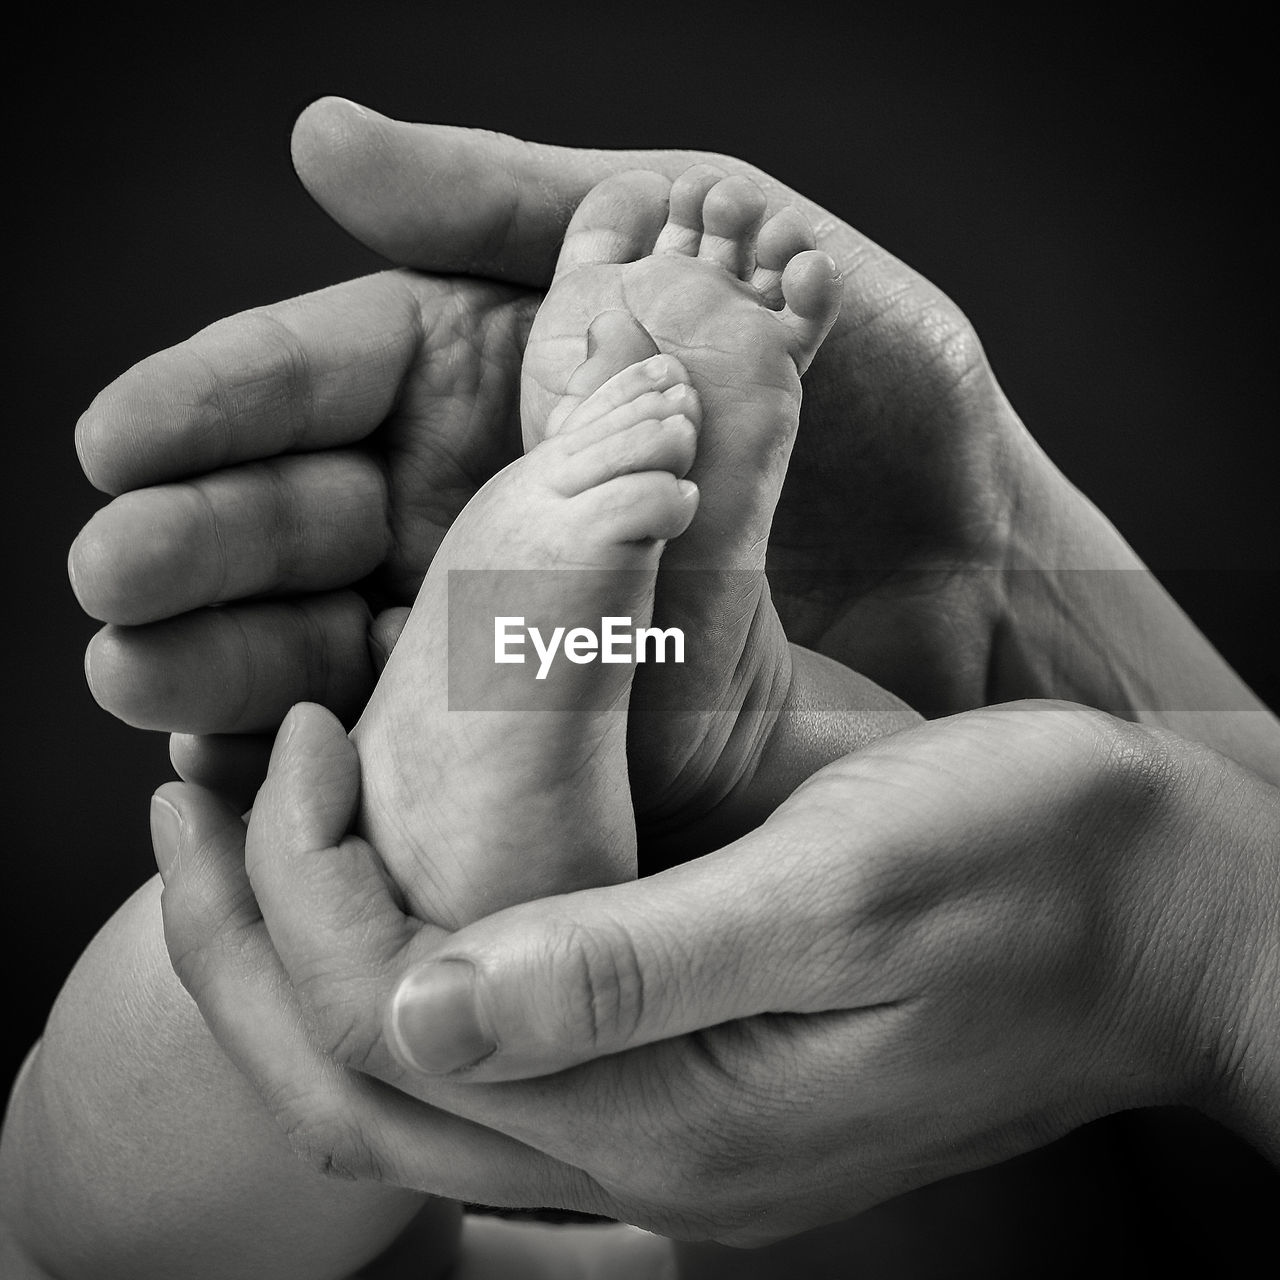 Cropped hands of mother holding baby legs against black background